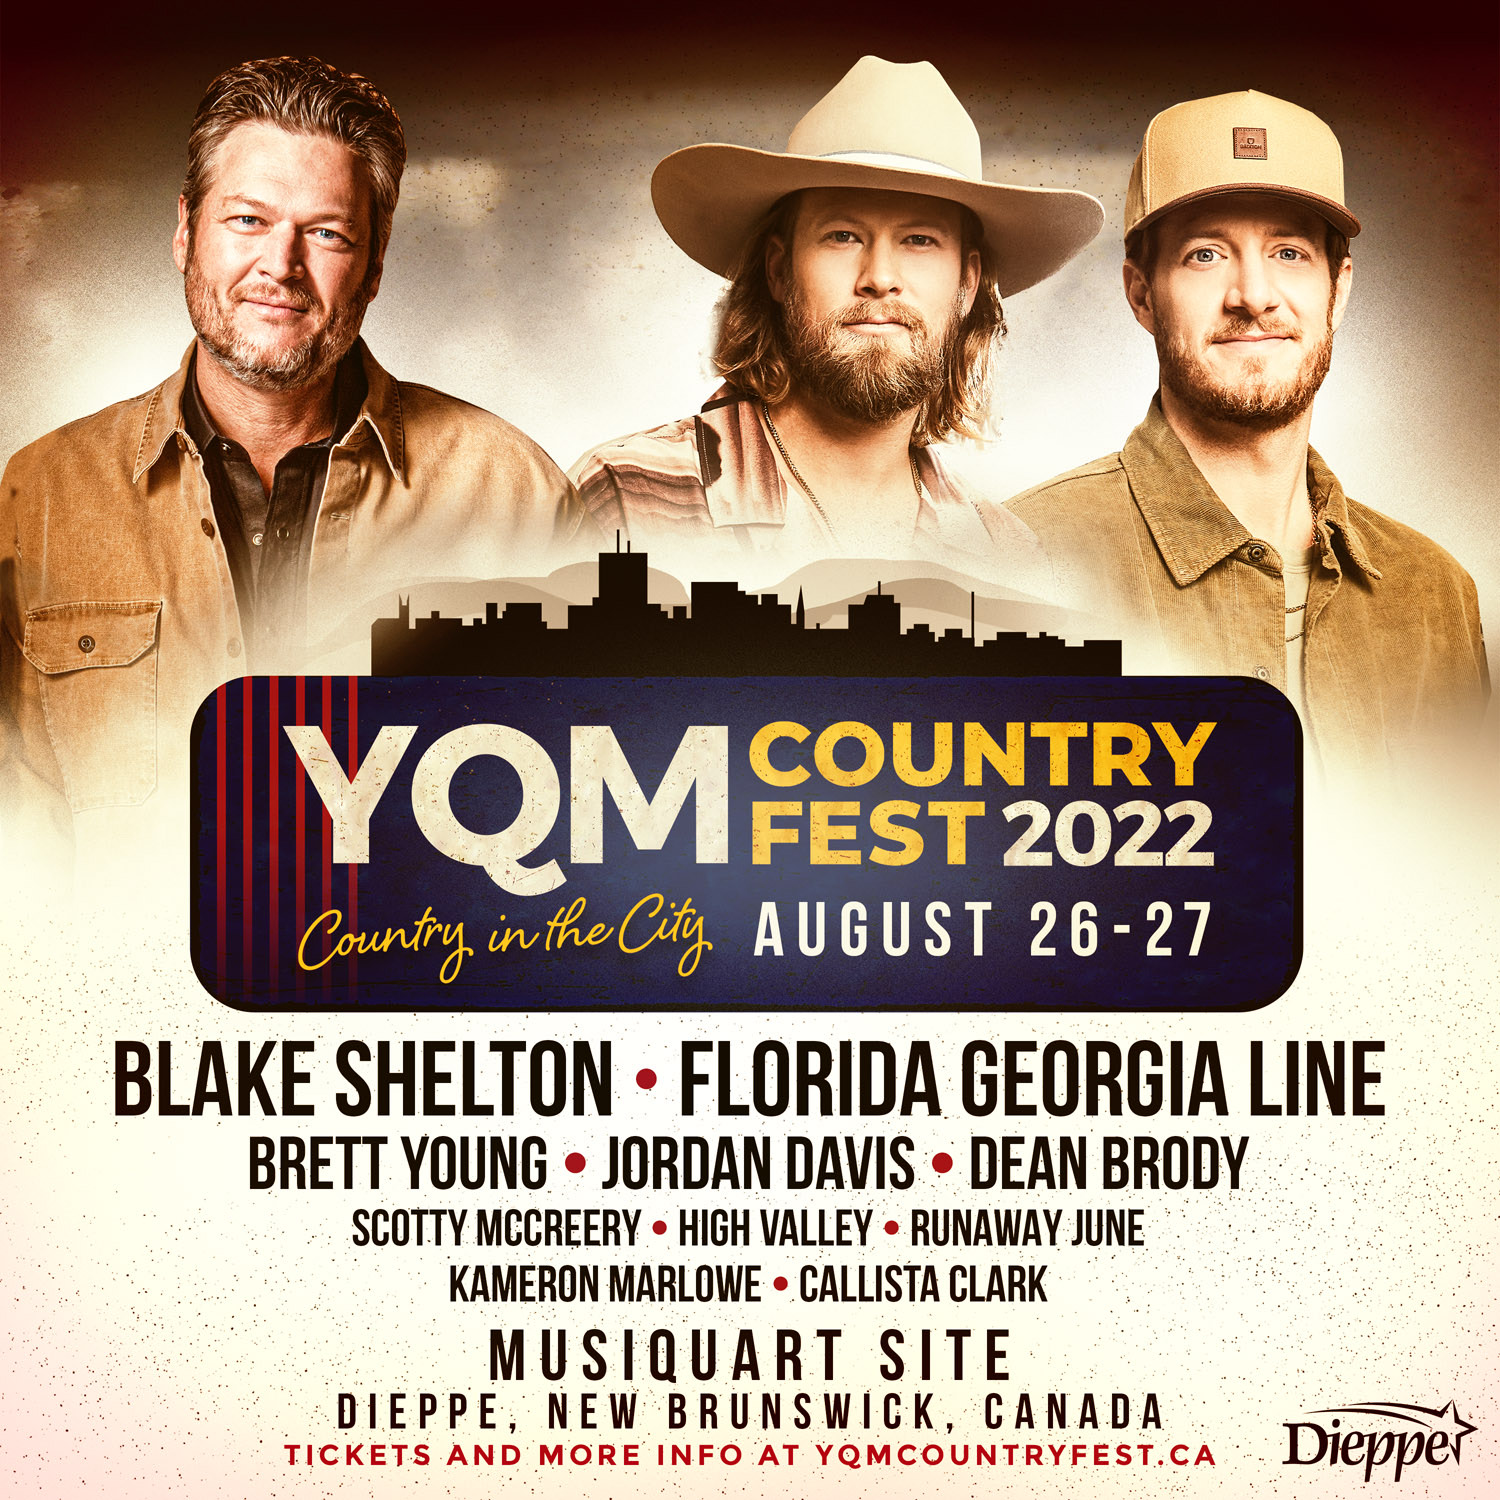 YQM Country Fest reveals spectacular 2022 lineup, Blake Shelton